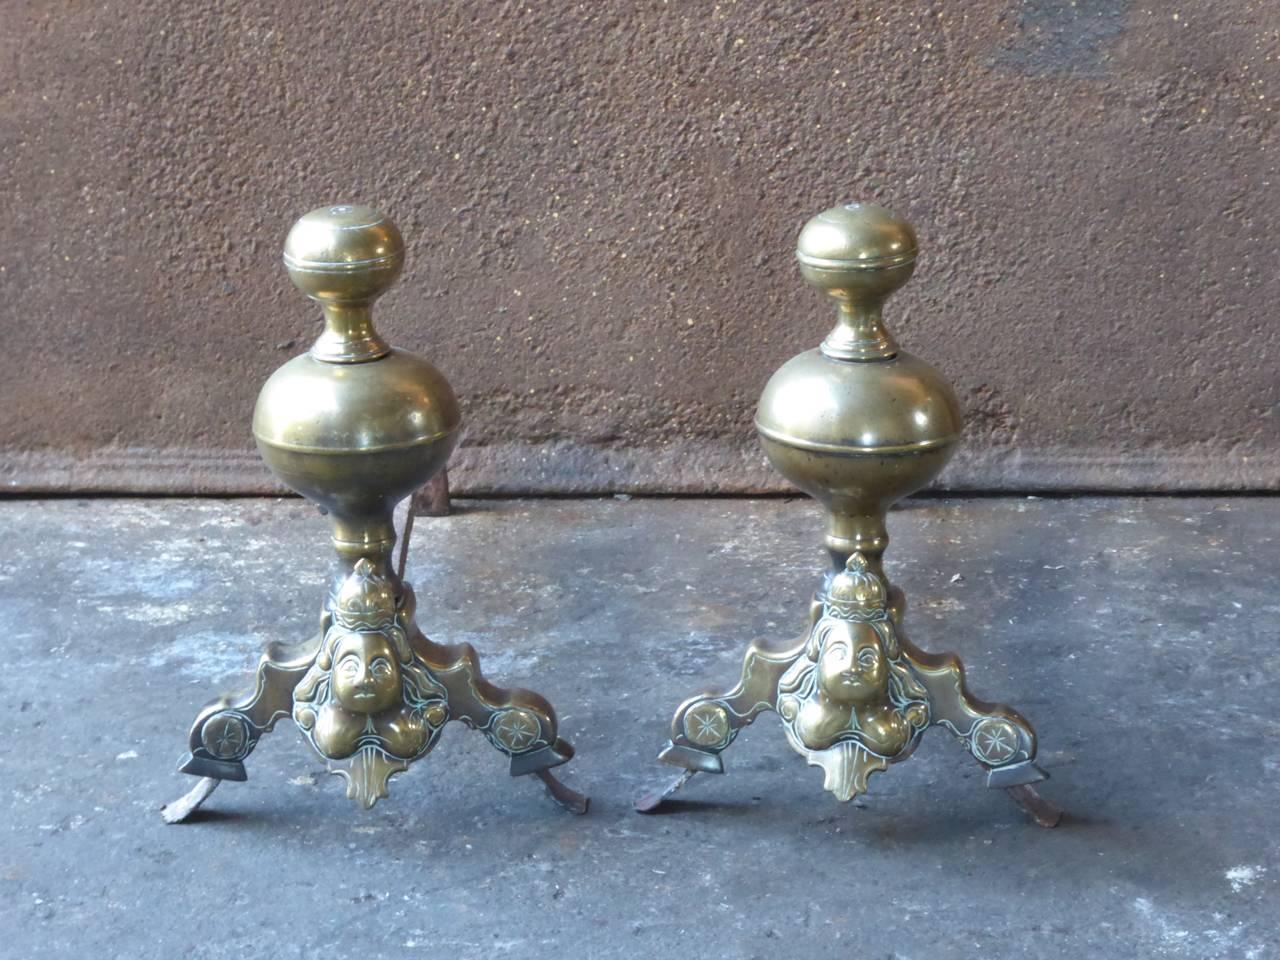 17th century French Louis XIV andirons made of bronze and wrought iron.

We have a unique and specialized collection of antique and used fireplace accessories consisting of more than 1000 listings at 1stdibs. Amongst others, we always have 300+